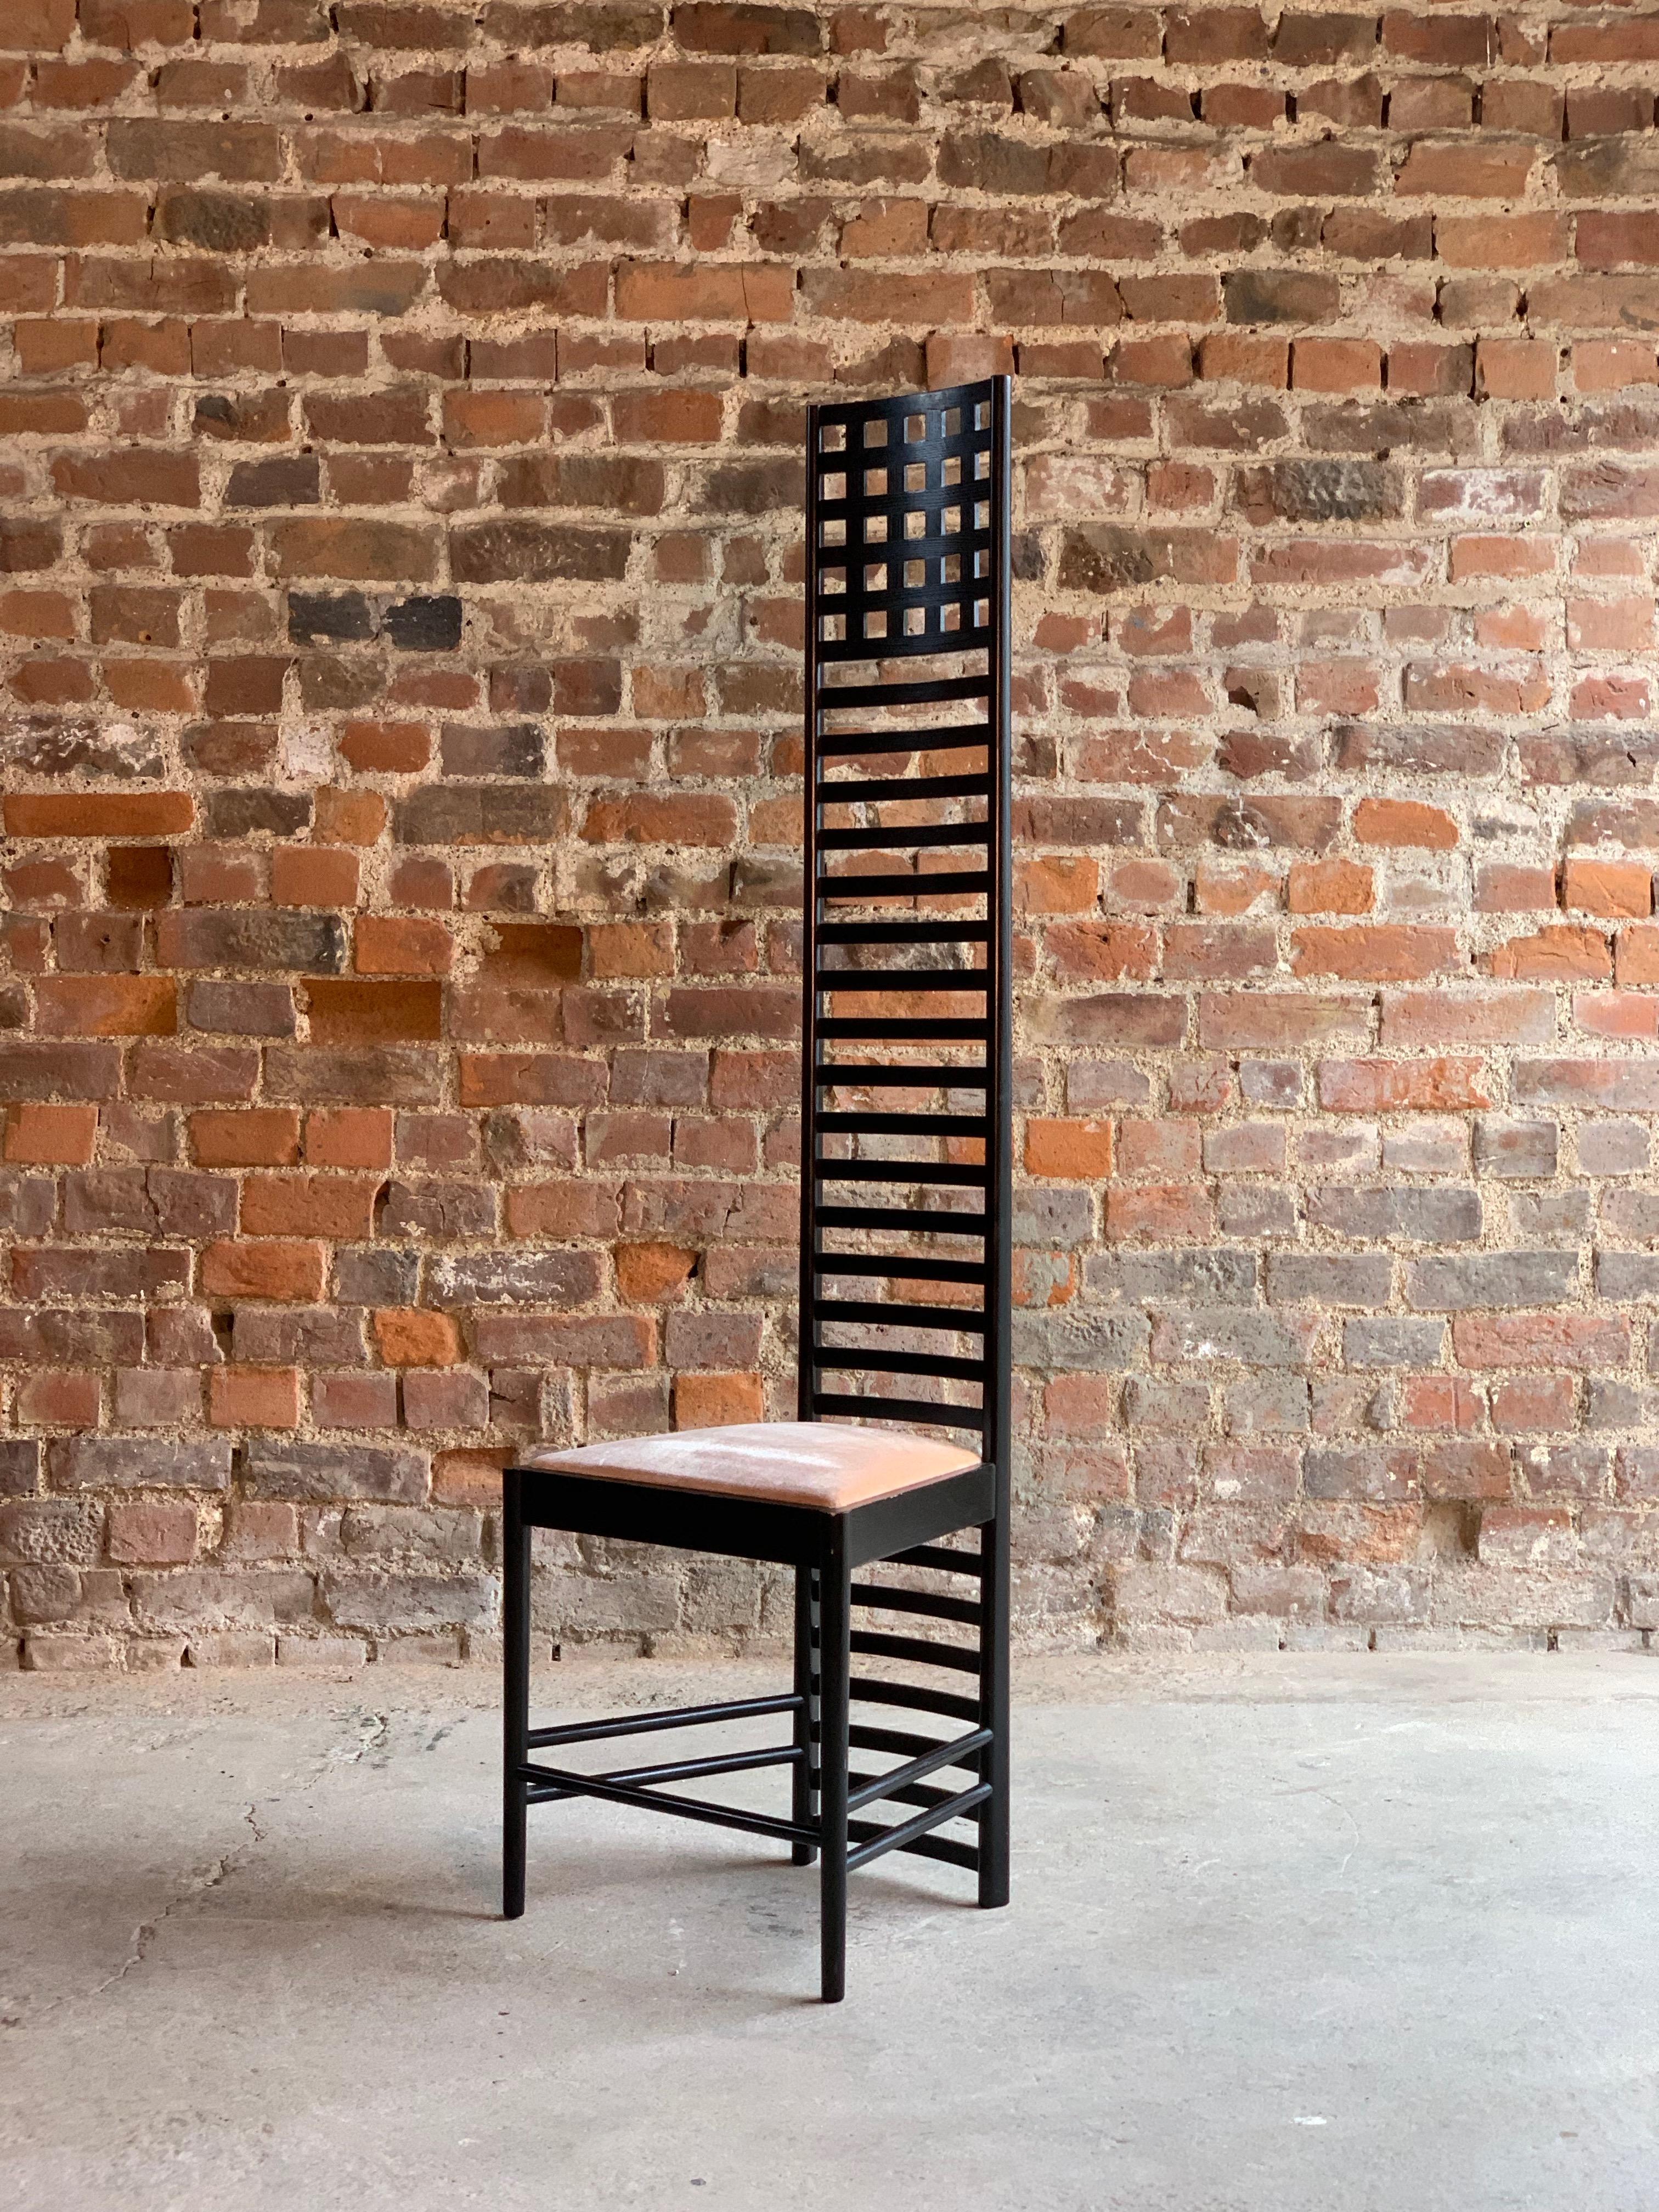 British Charles Renee Mackintosh Hill House 1 Chair by Cassina, 1995